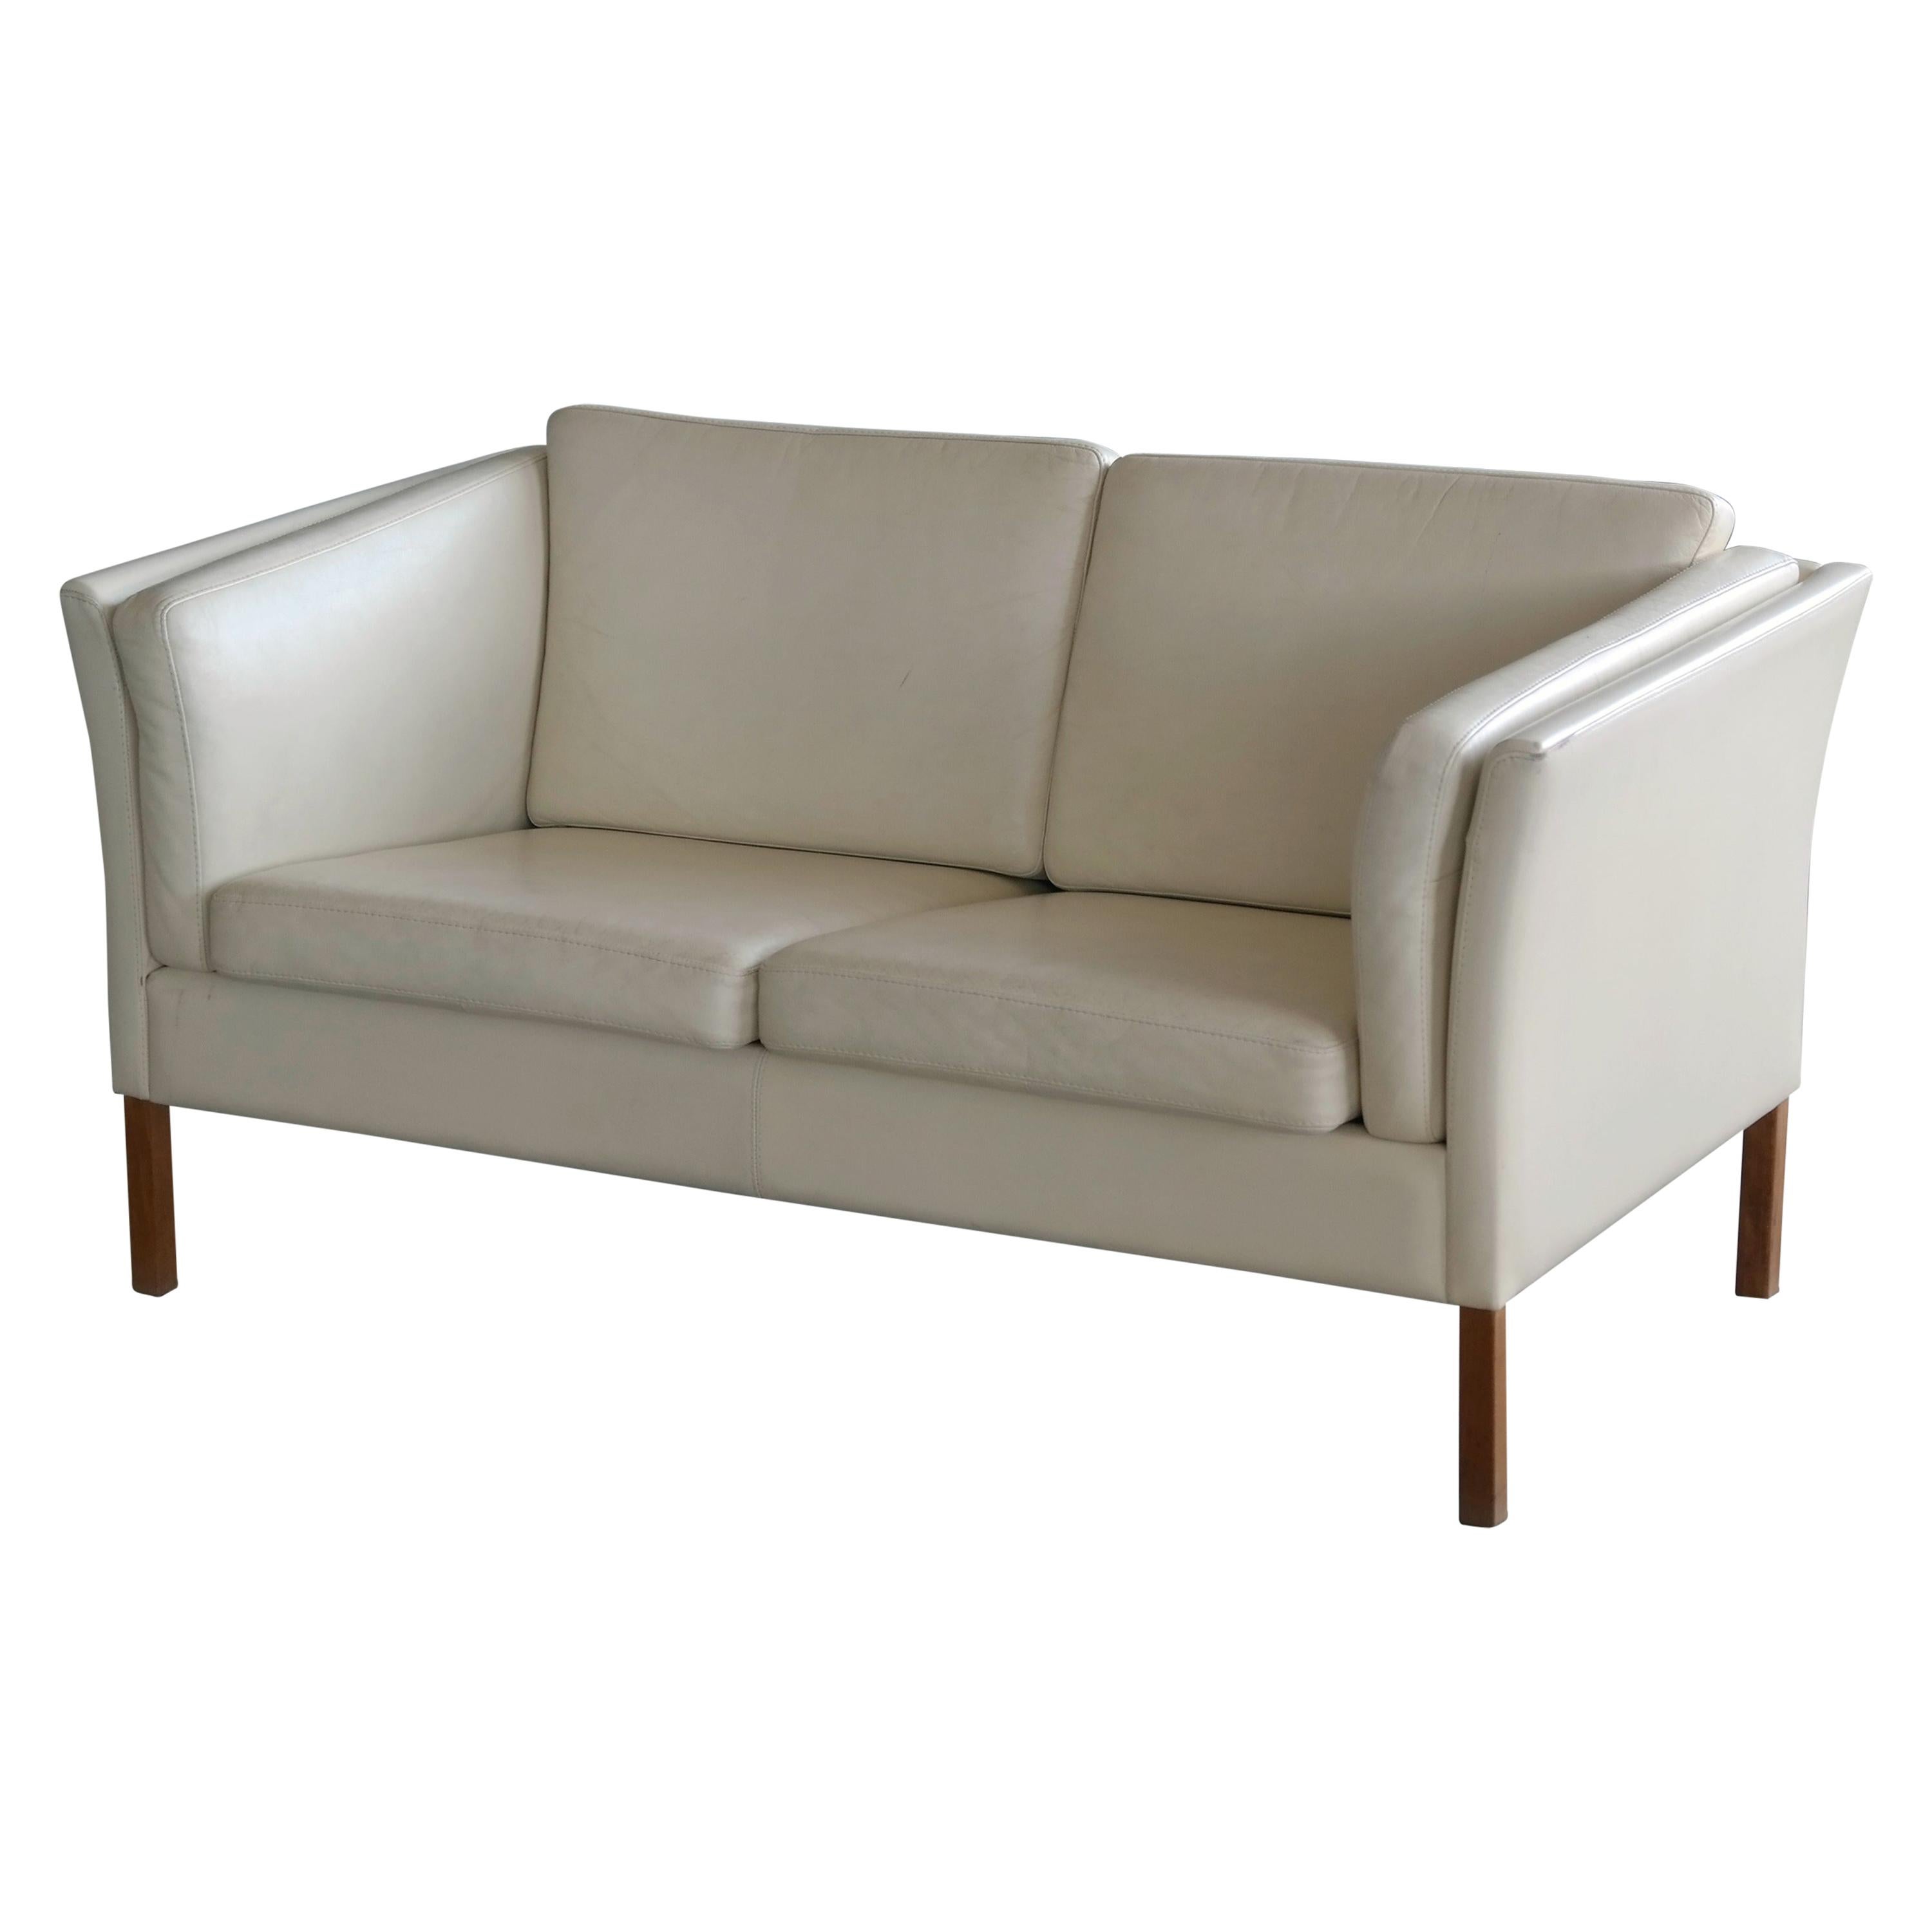 Danish 1960s Loveseat in Cream Colored Leather in Style of Borge Mogensen